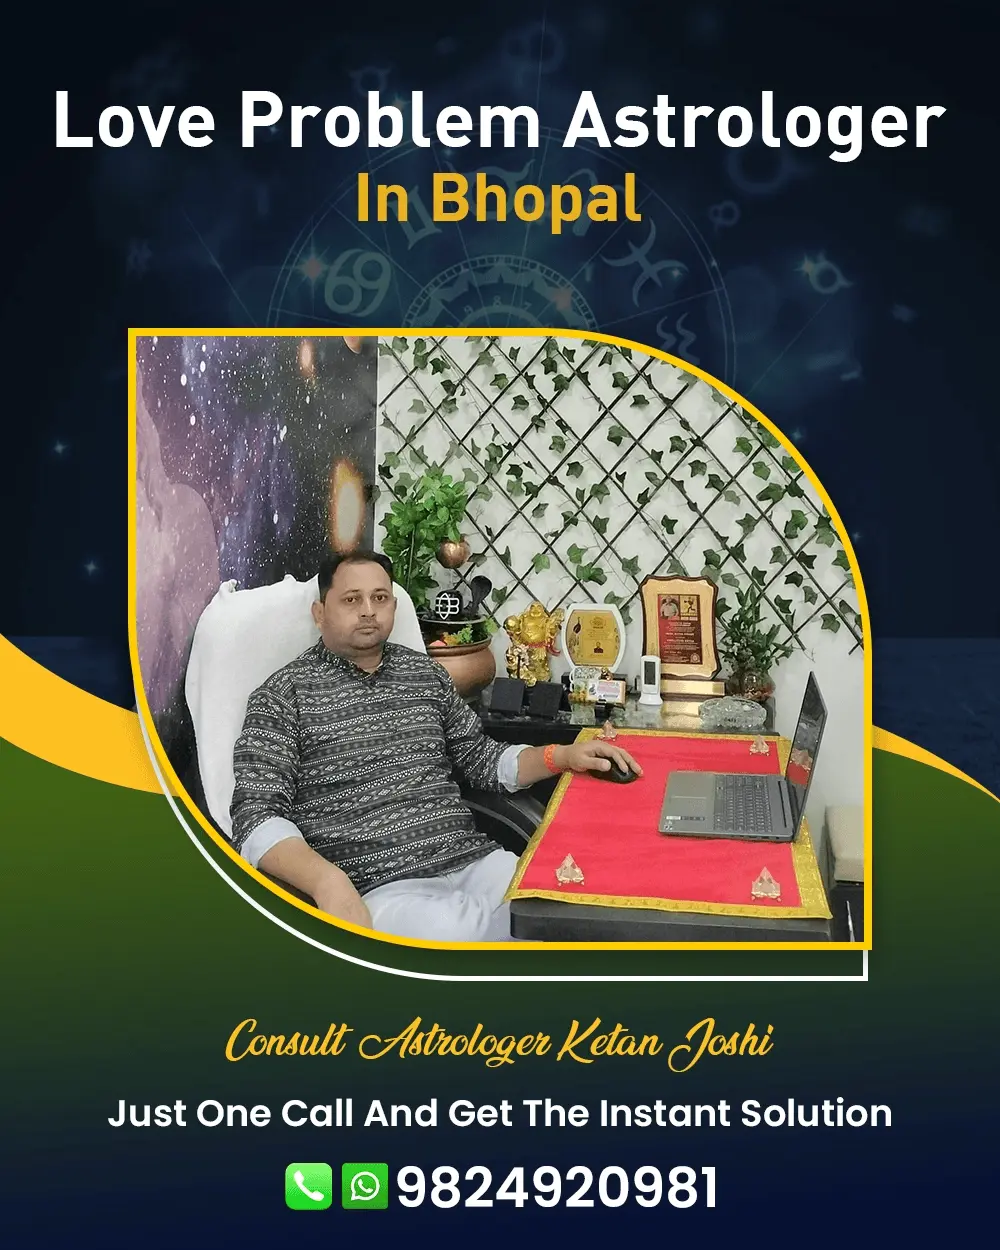 Love Problem Astrologer In Bhopal